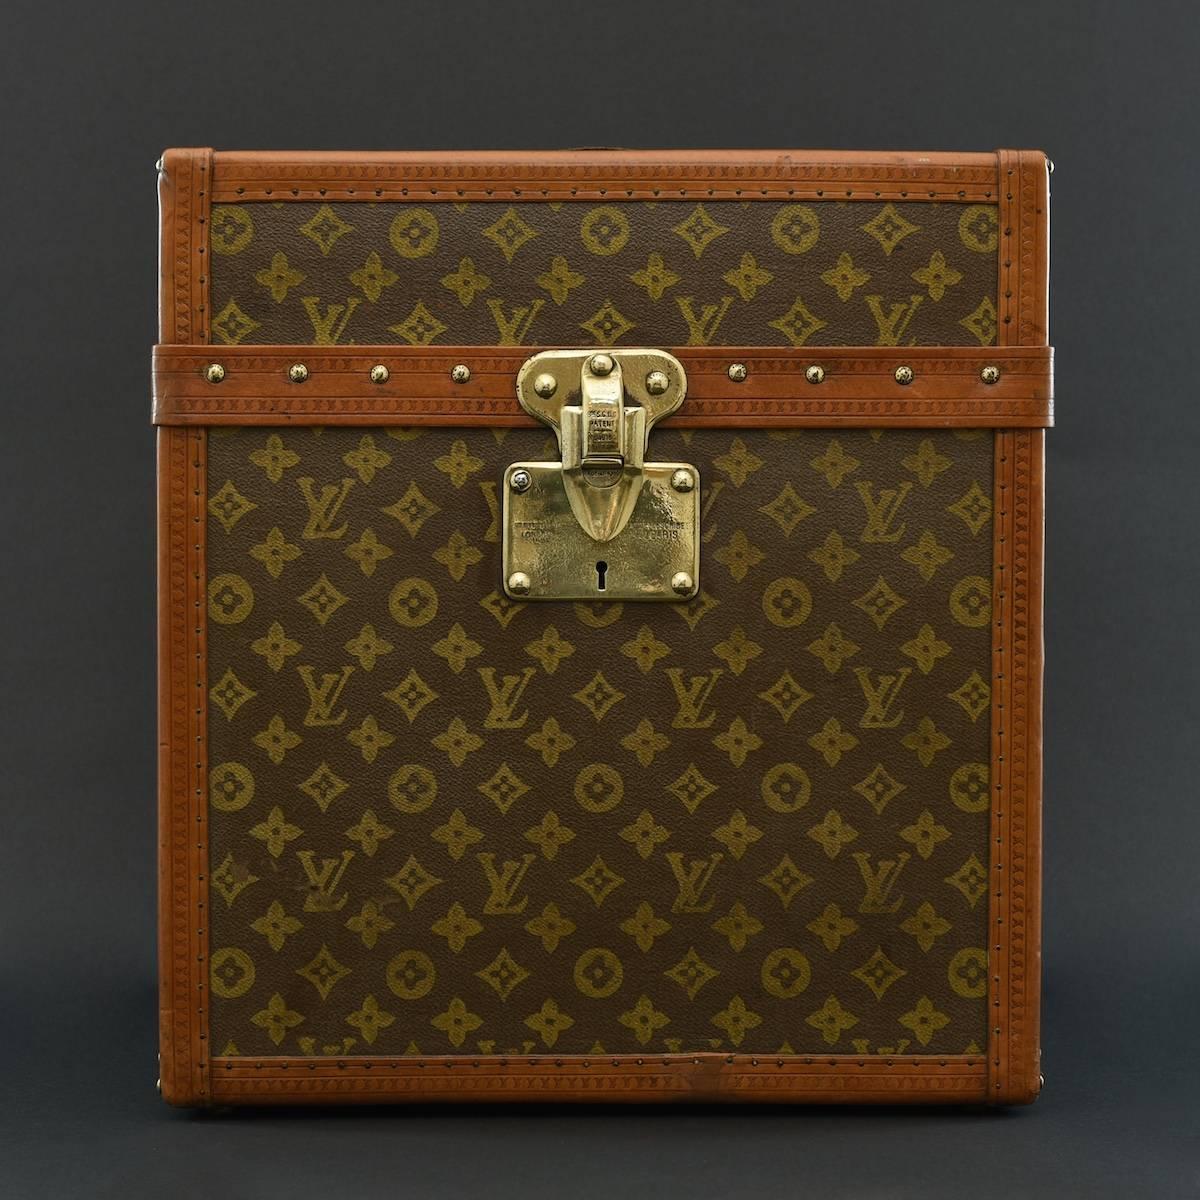 Rare Louis Vuitton Monogram Hat Box trunk in excellent condition with lozine trim to the edges, brass lock, leather handle and original tray & straps to the interior, c1910.

Louis Vuitton was founded by its namesake in 1854, with the first shop on